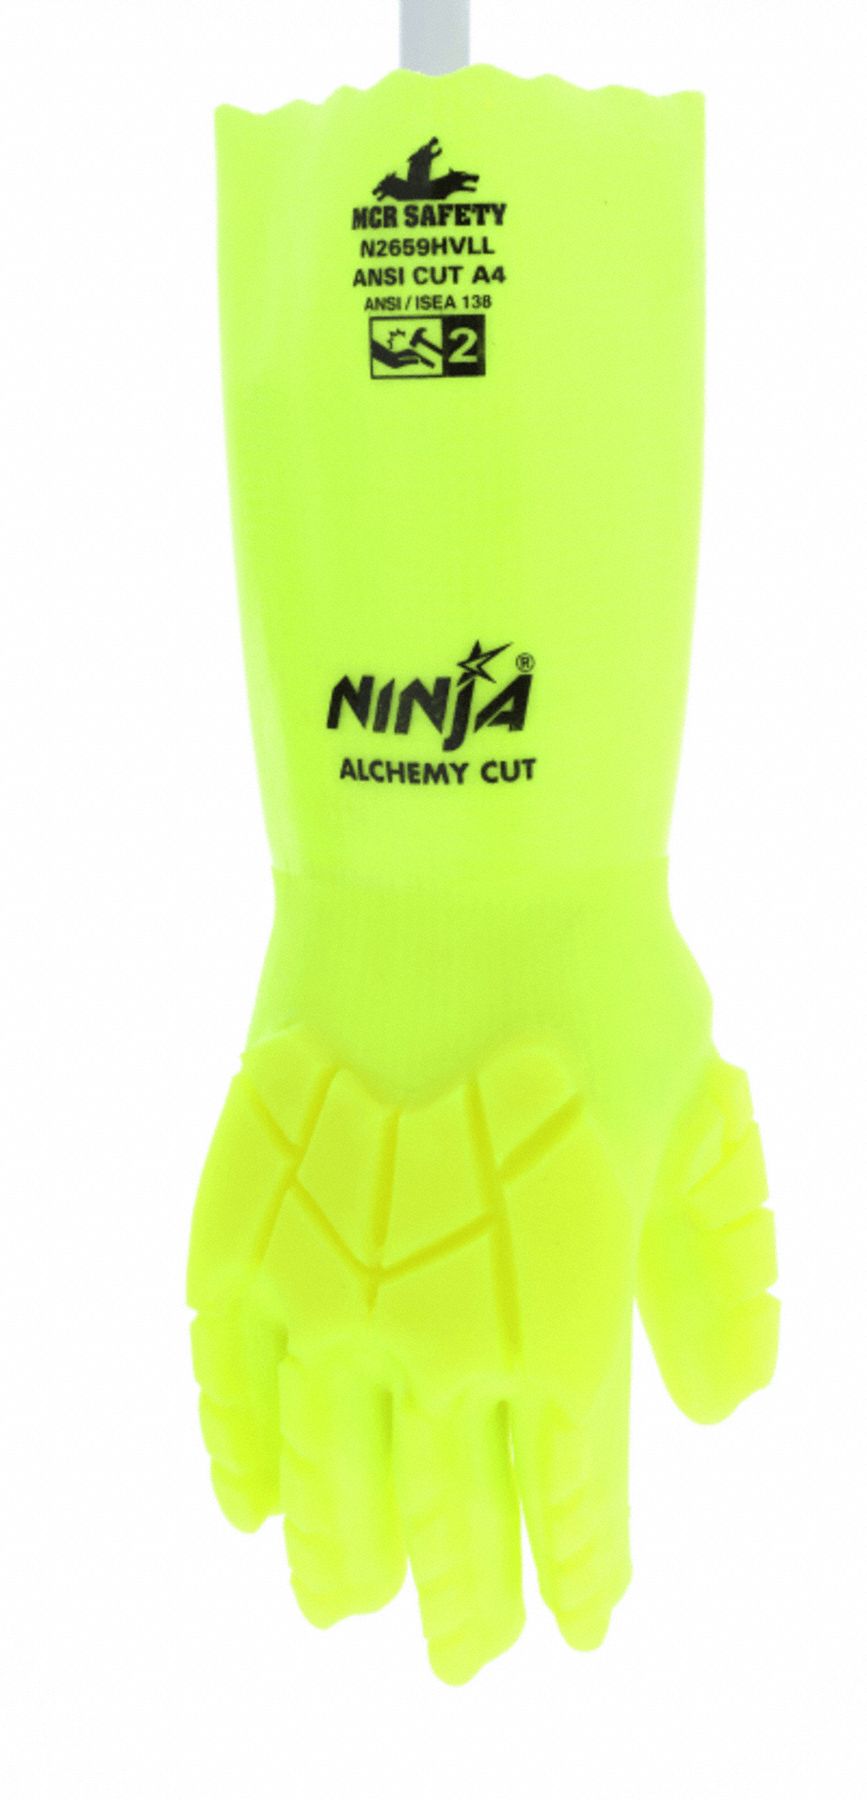 MCR SAFETY Chemical and Impact Resistant: ANSI/ISEA Cut Level A4, 14 in Glove Lg, Lime, Ninja 